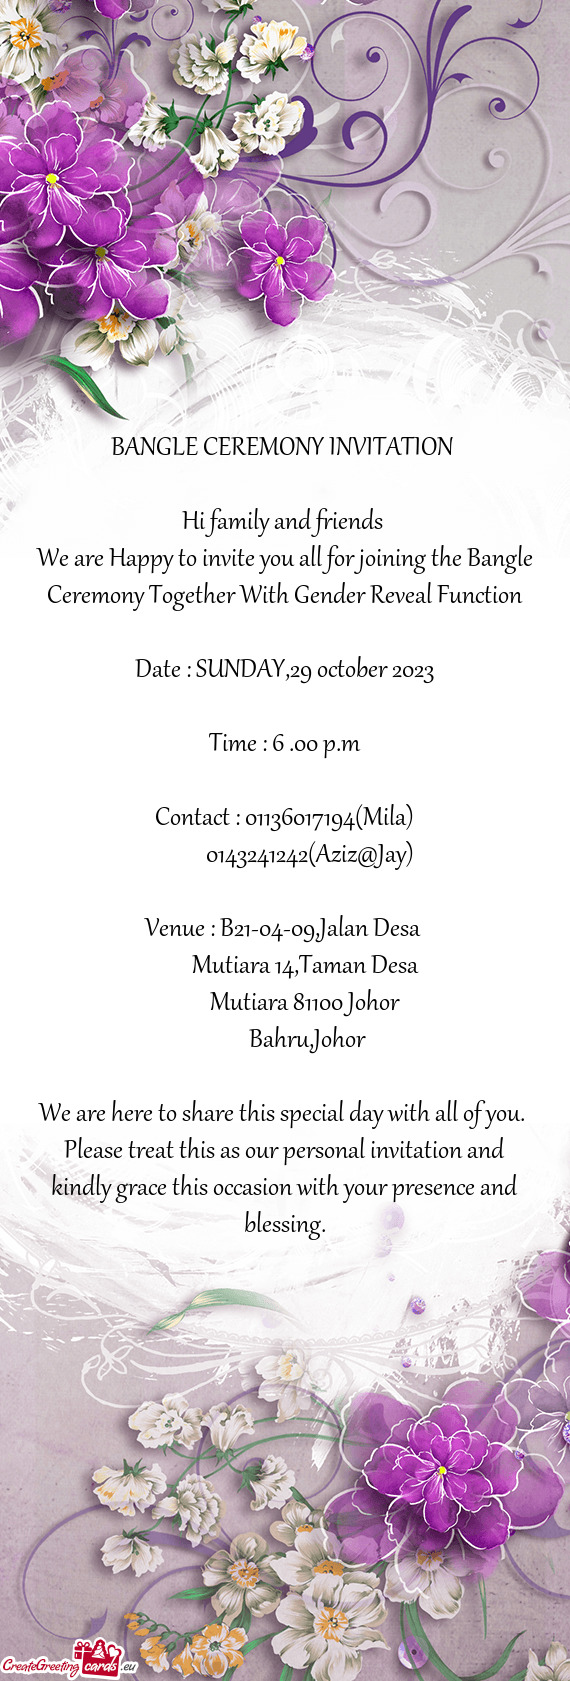 We are Happy to invite you all for joining the Bangle Ceremony Together With Gender Reveal Function